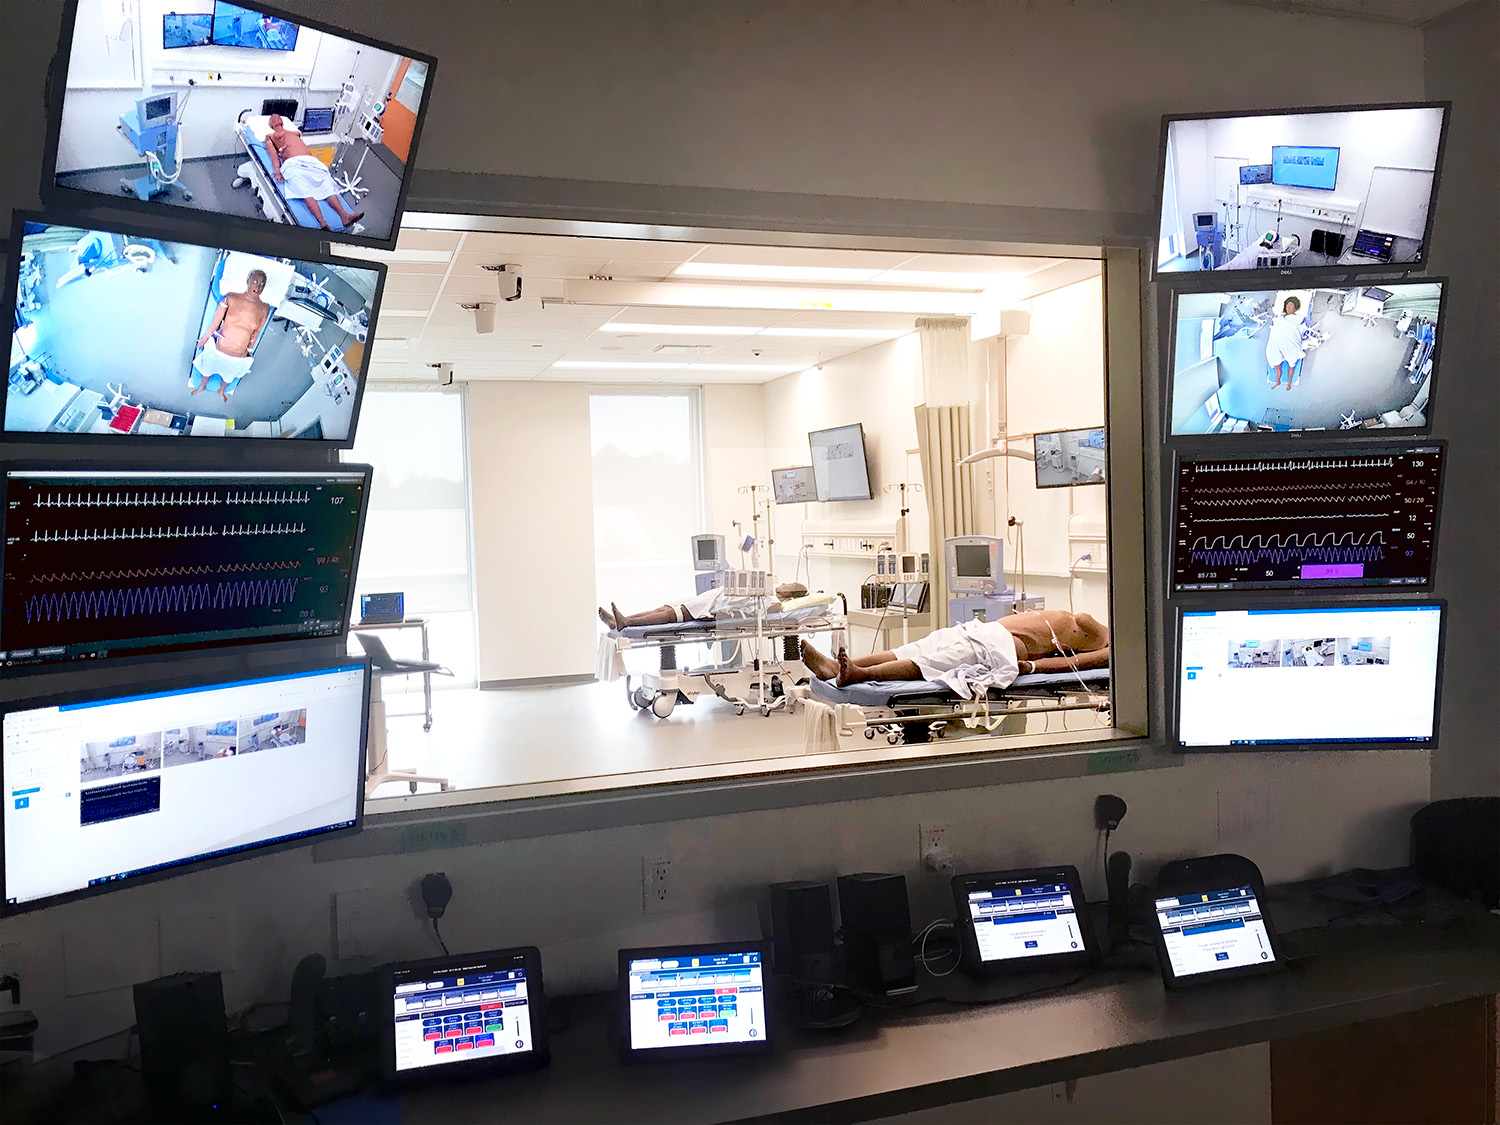 The patient simulator systems within rooms such as this High Fidelity Lab are tied to the AV system to allow two-way communication between the lab and the control room. 